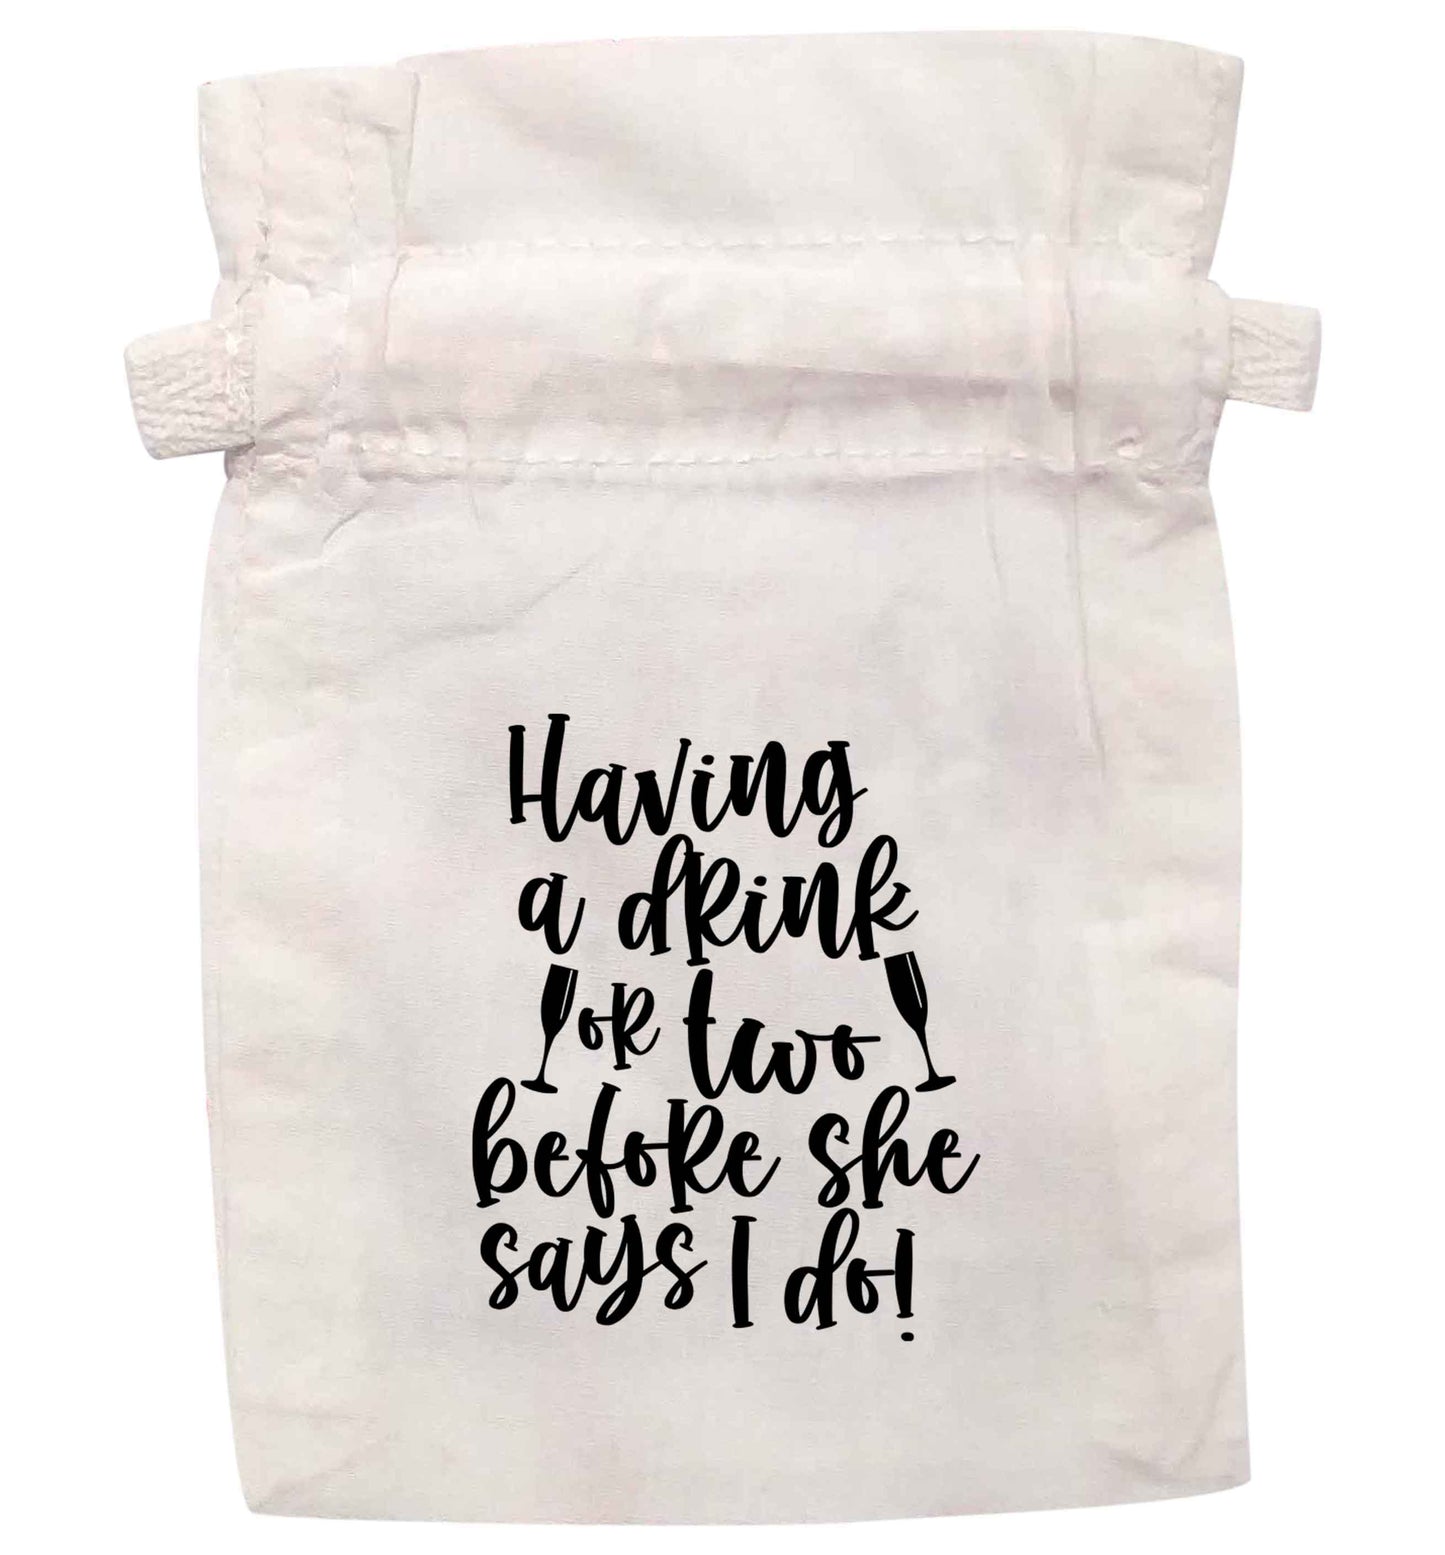 Having a drink or two before she says I do | XS - L | Pouch / Drawstring bag / Sack | Organic Cotton | Bulk discounts available!